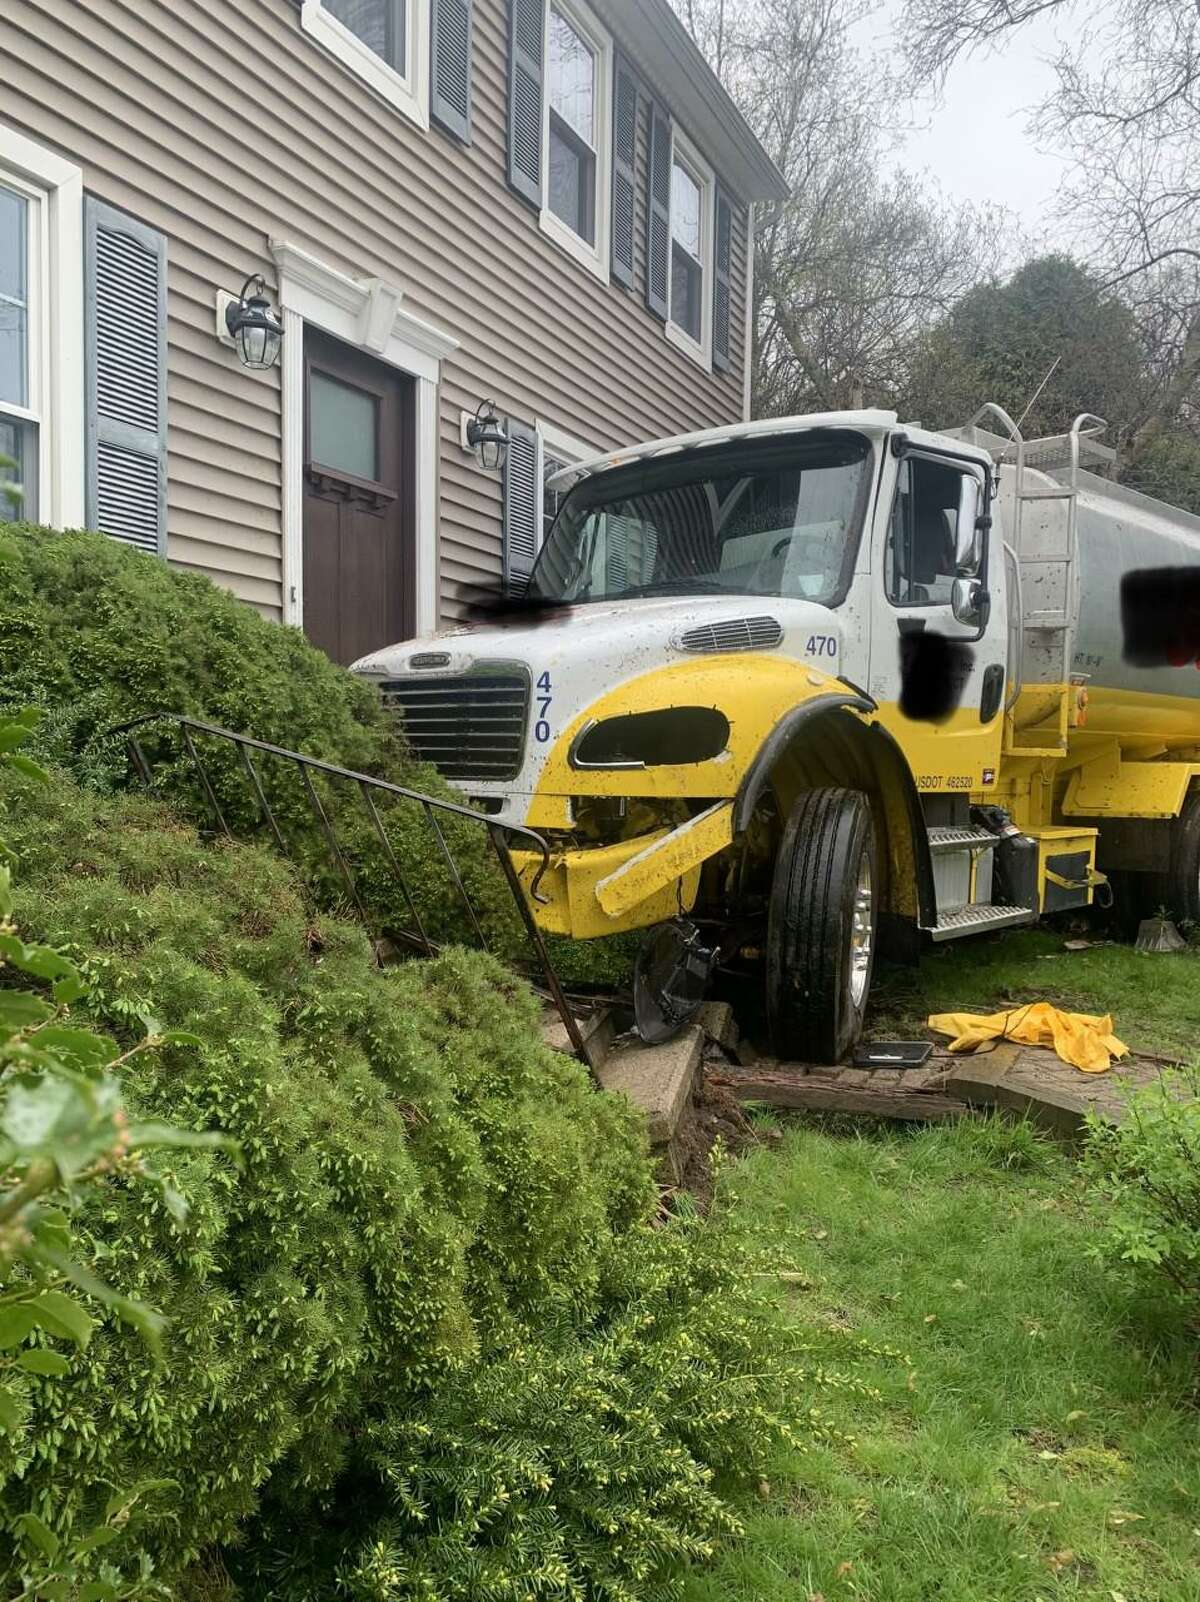 Shelton firefighters responded to a truck hitting a house on Sheehy Lane Wednesday, May 4, 2022.